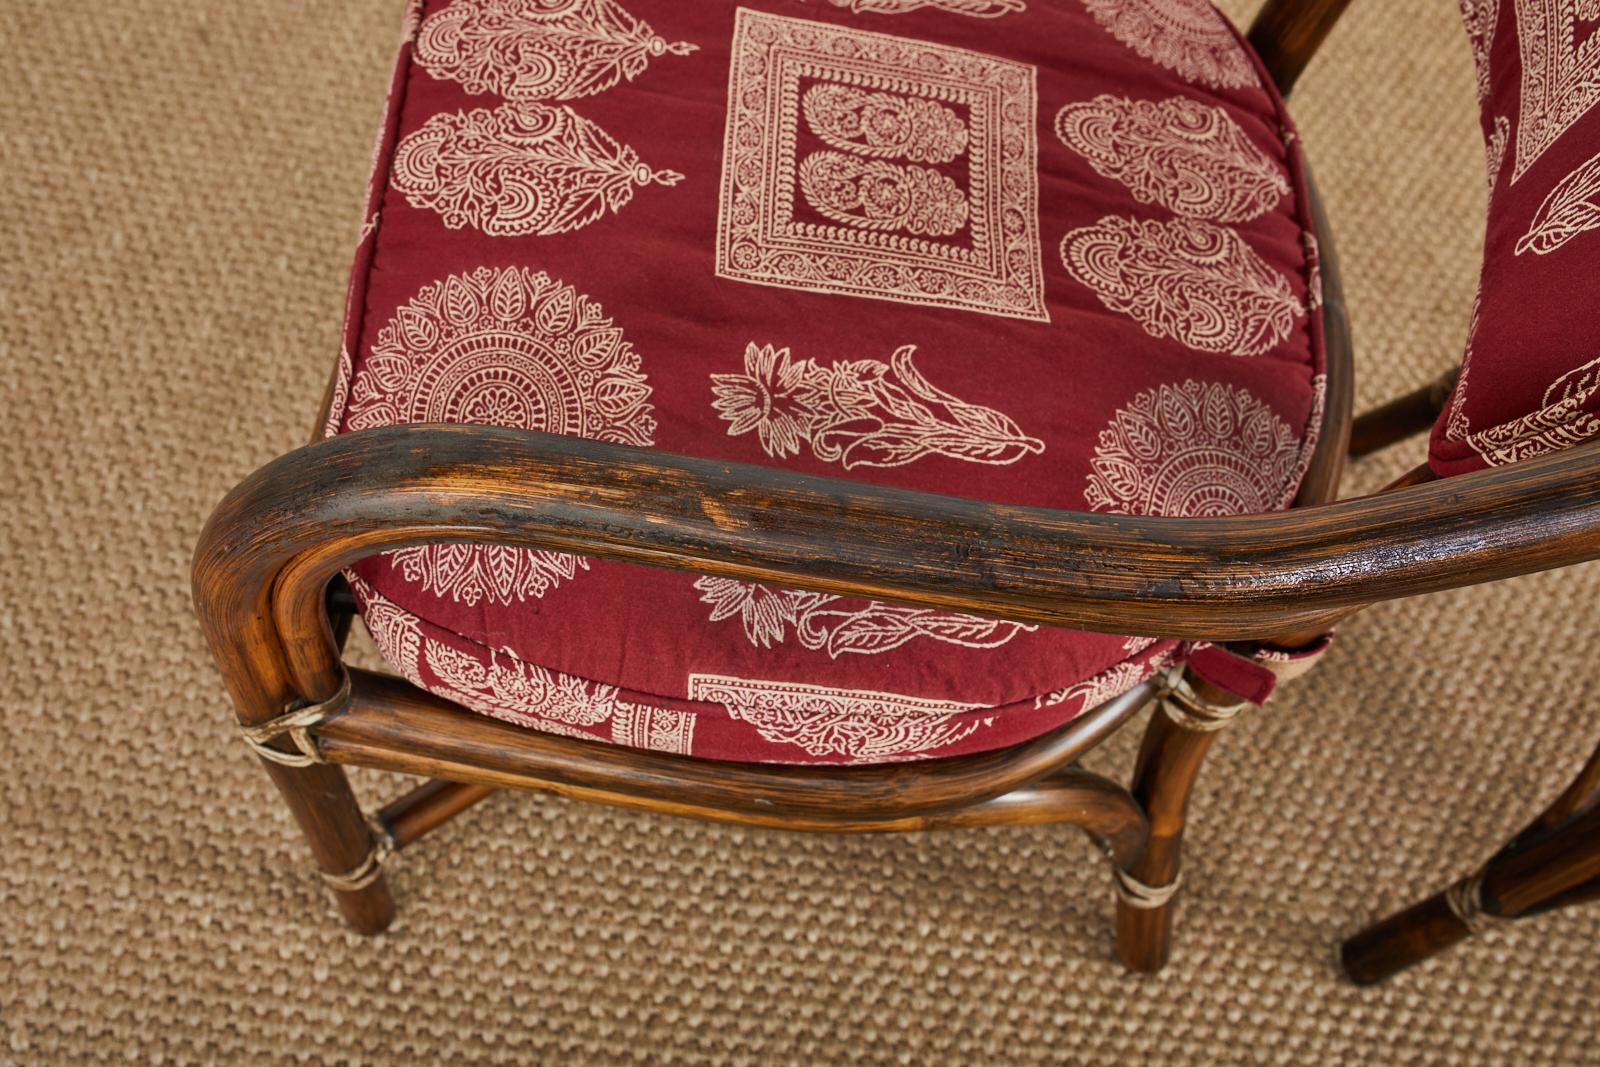 20th Century Pair of McGuire Armchairs with Rajasthan Style Upholstery